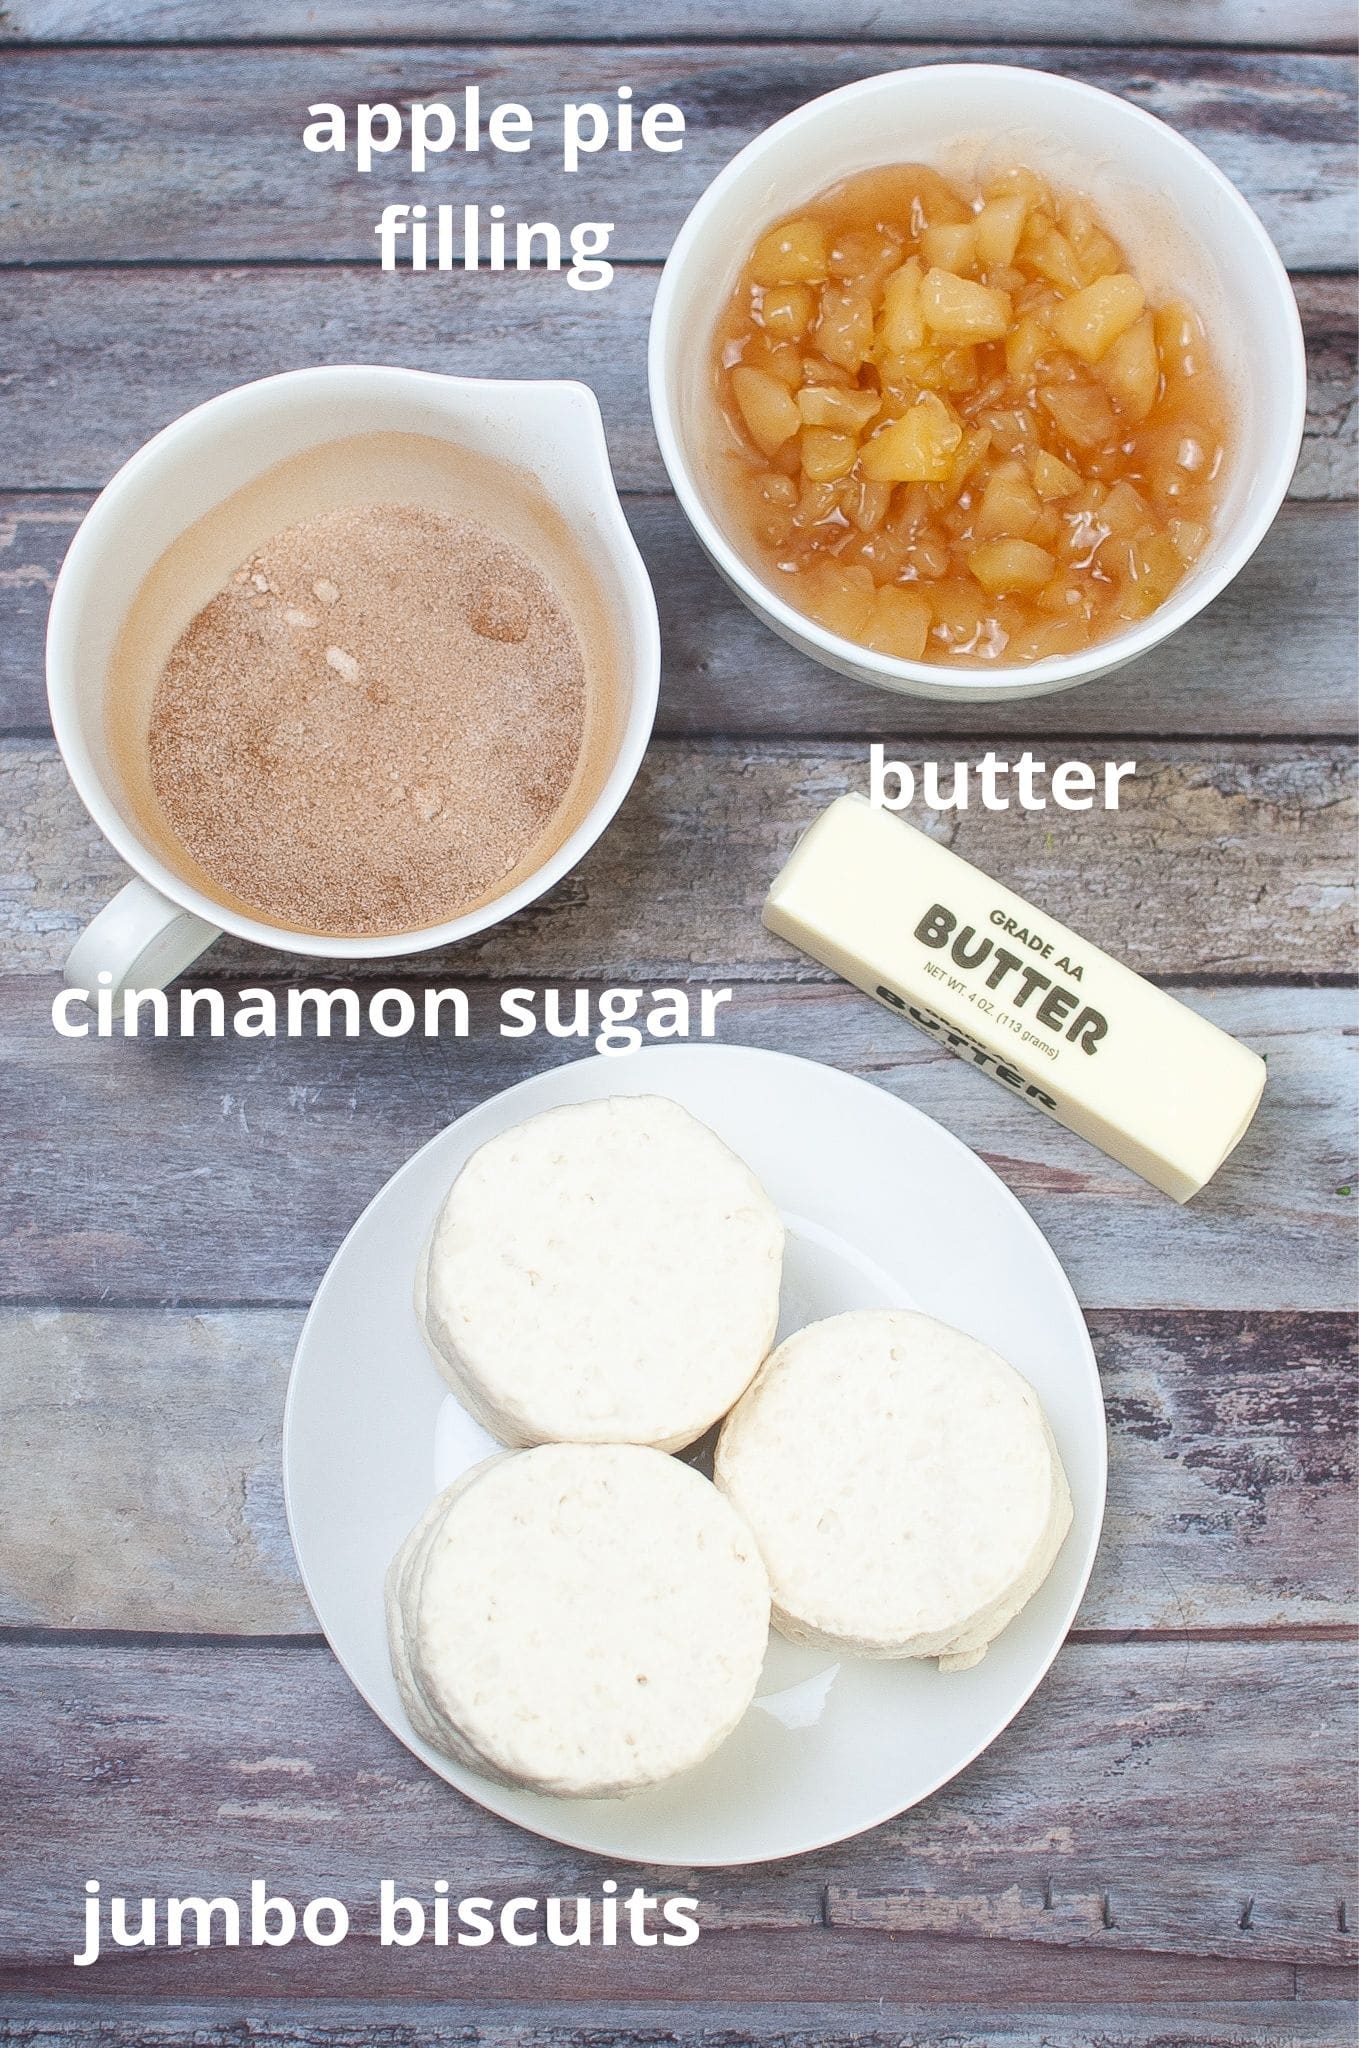 bowls of cinnamon sugar, apple pie filling, butter and jumbo canned biscuits on a wooden background